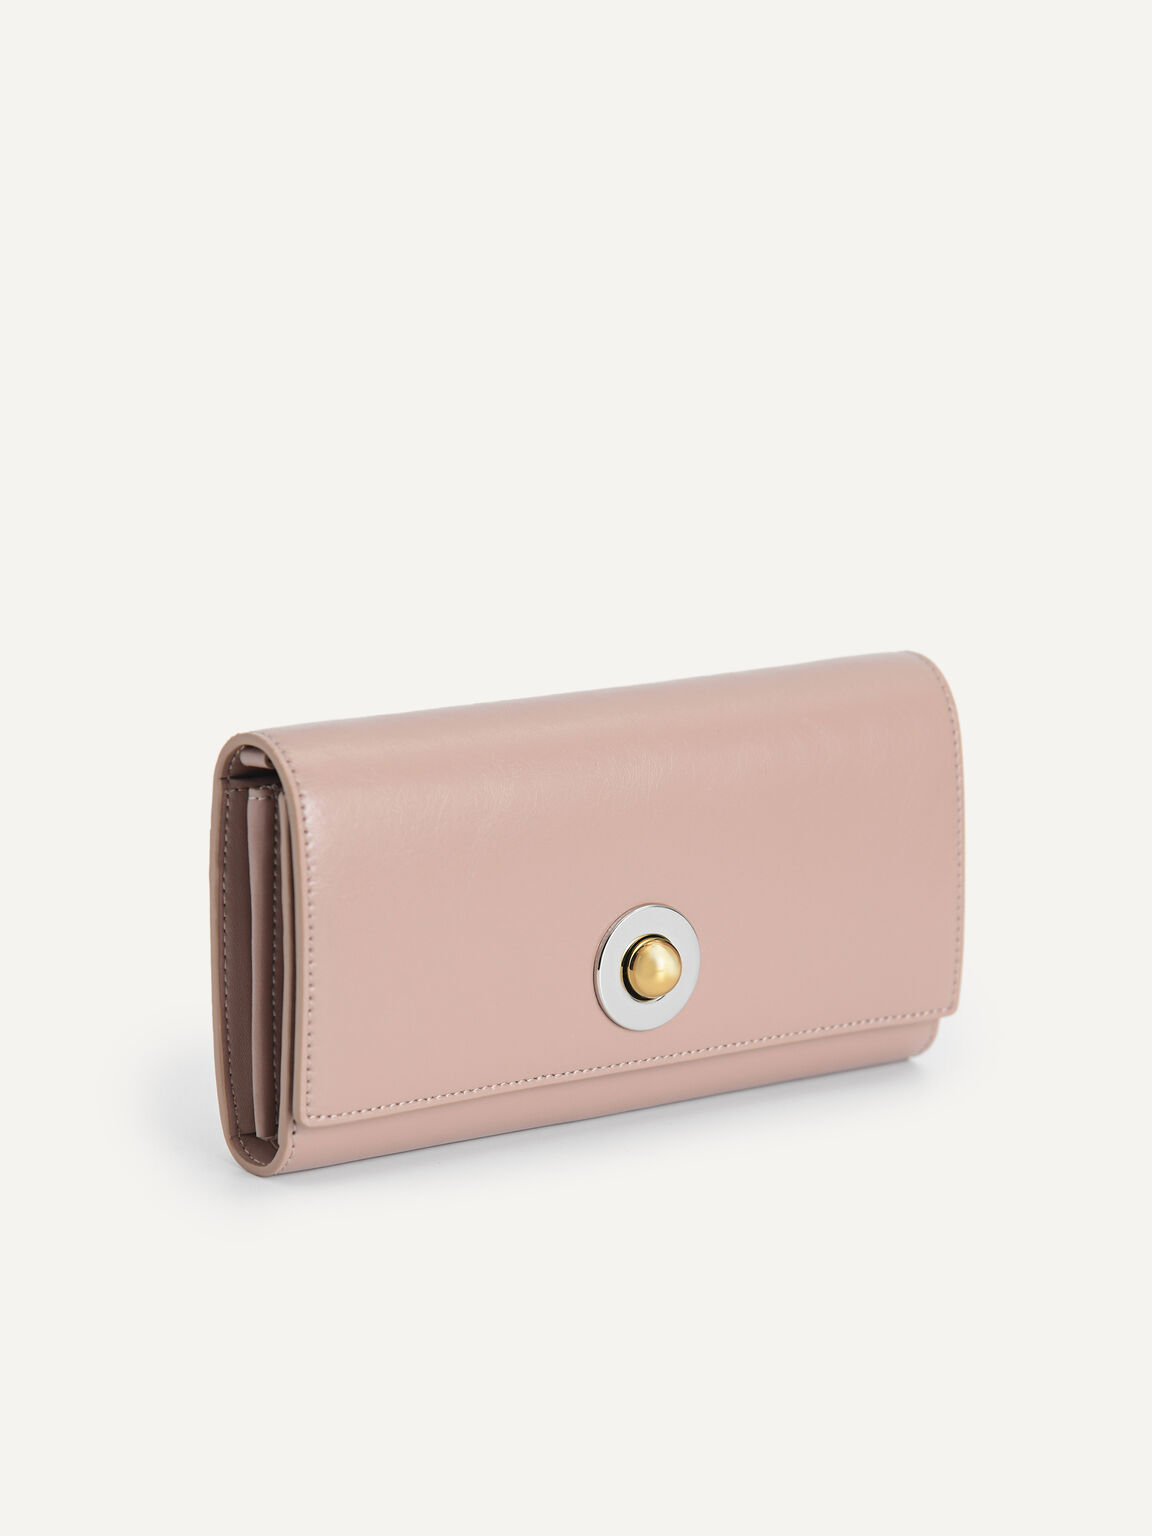 Leather Bi-Fold Wallet with Detachable Chain, Taupe, hi-res